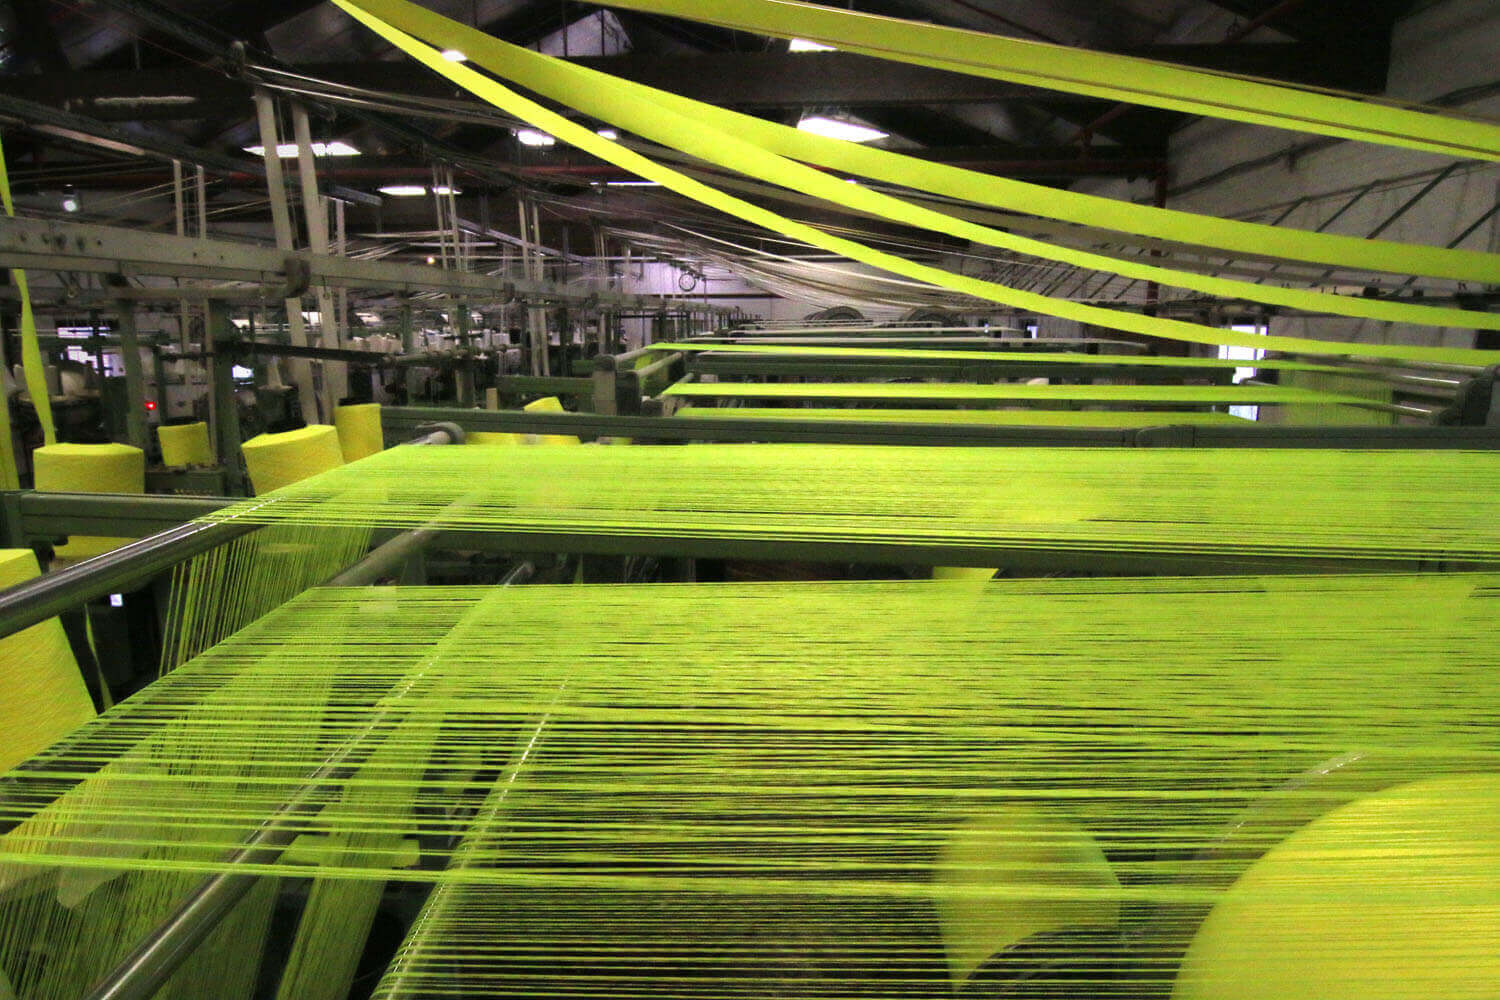 Textile machinery processing strands of yellow fabric